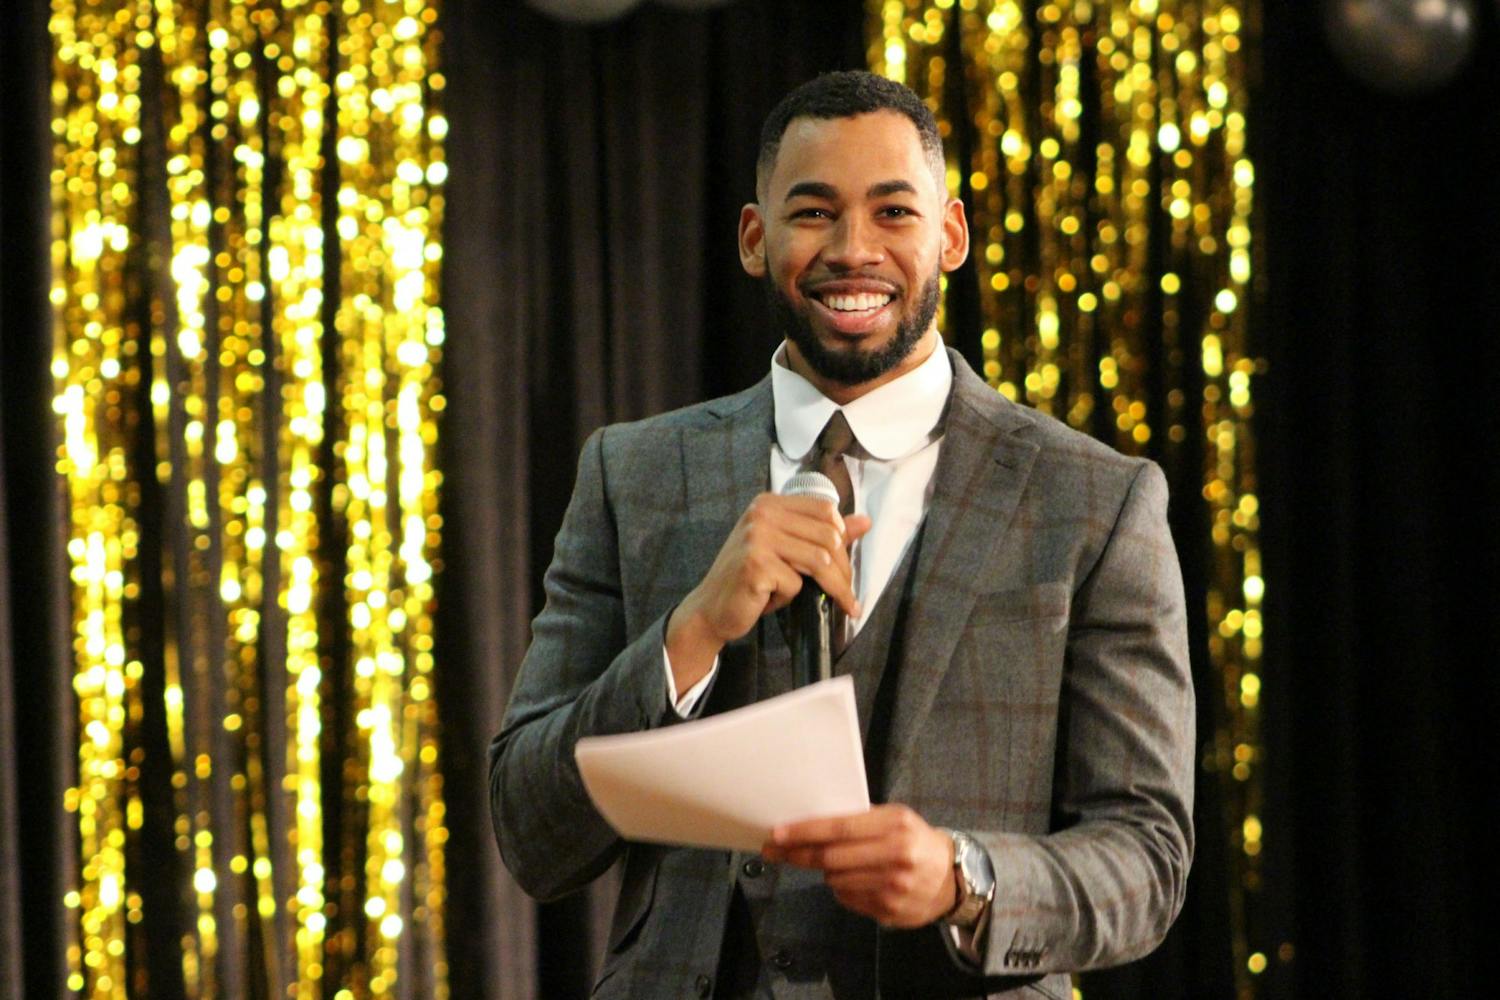 Mike Johnson smiles for the crowd while hosting The Dating Game presented by Carolina Productions and freshman council Feb. 19, 2020.